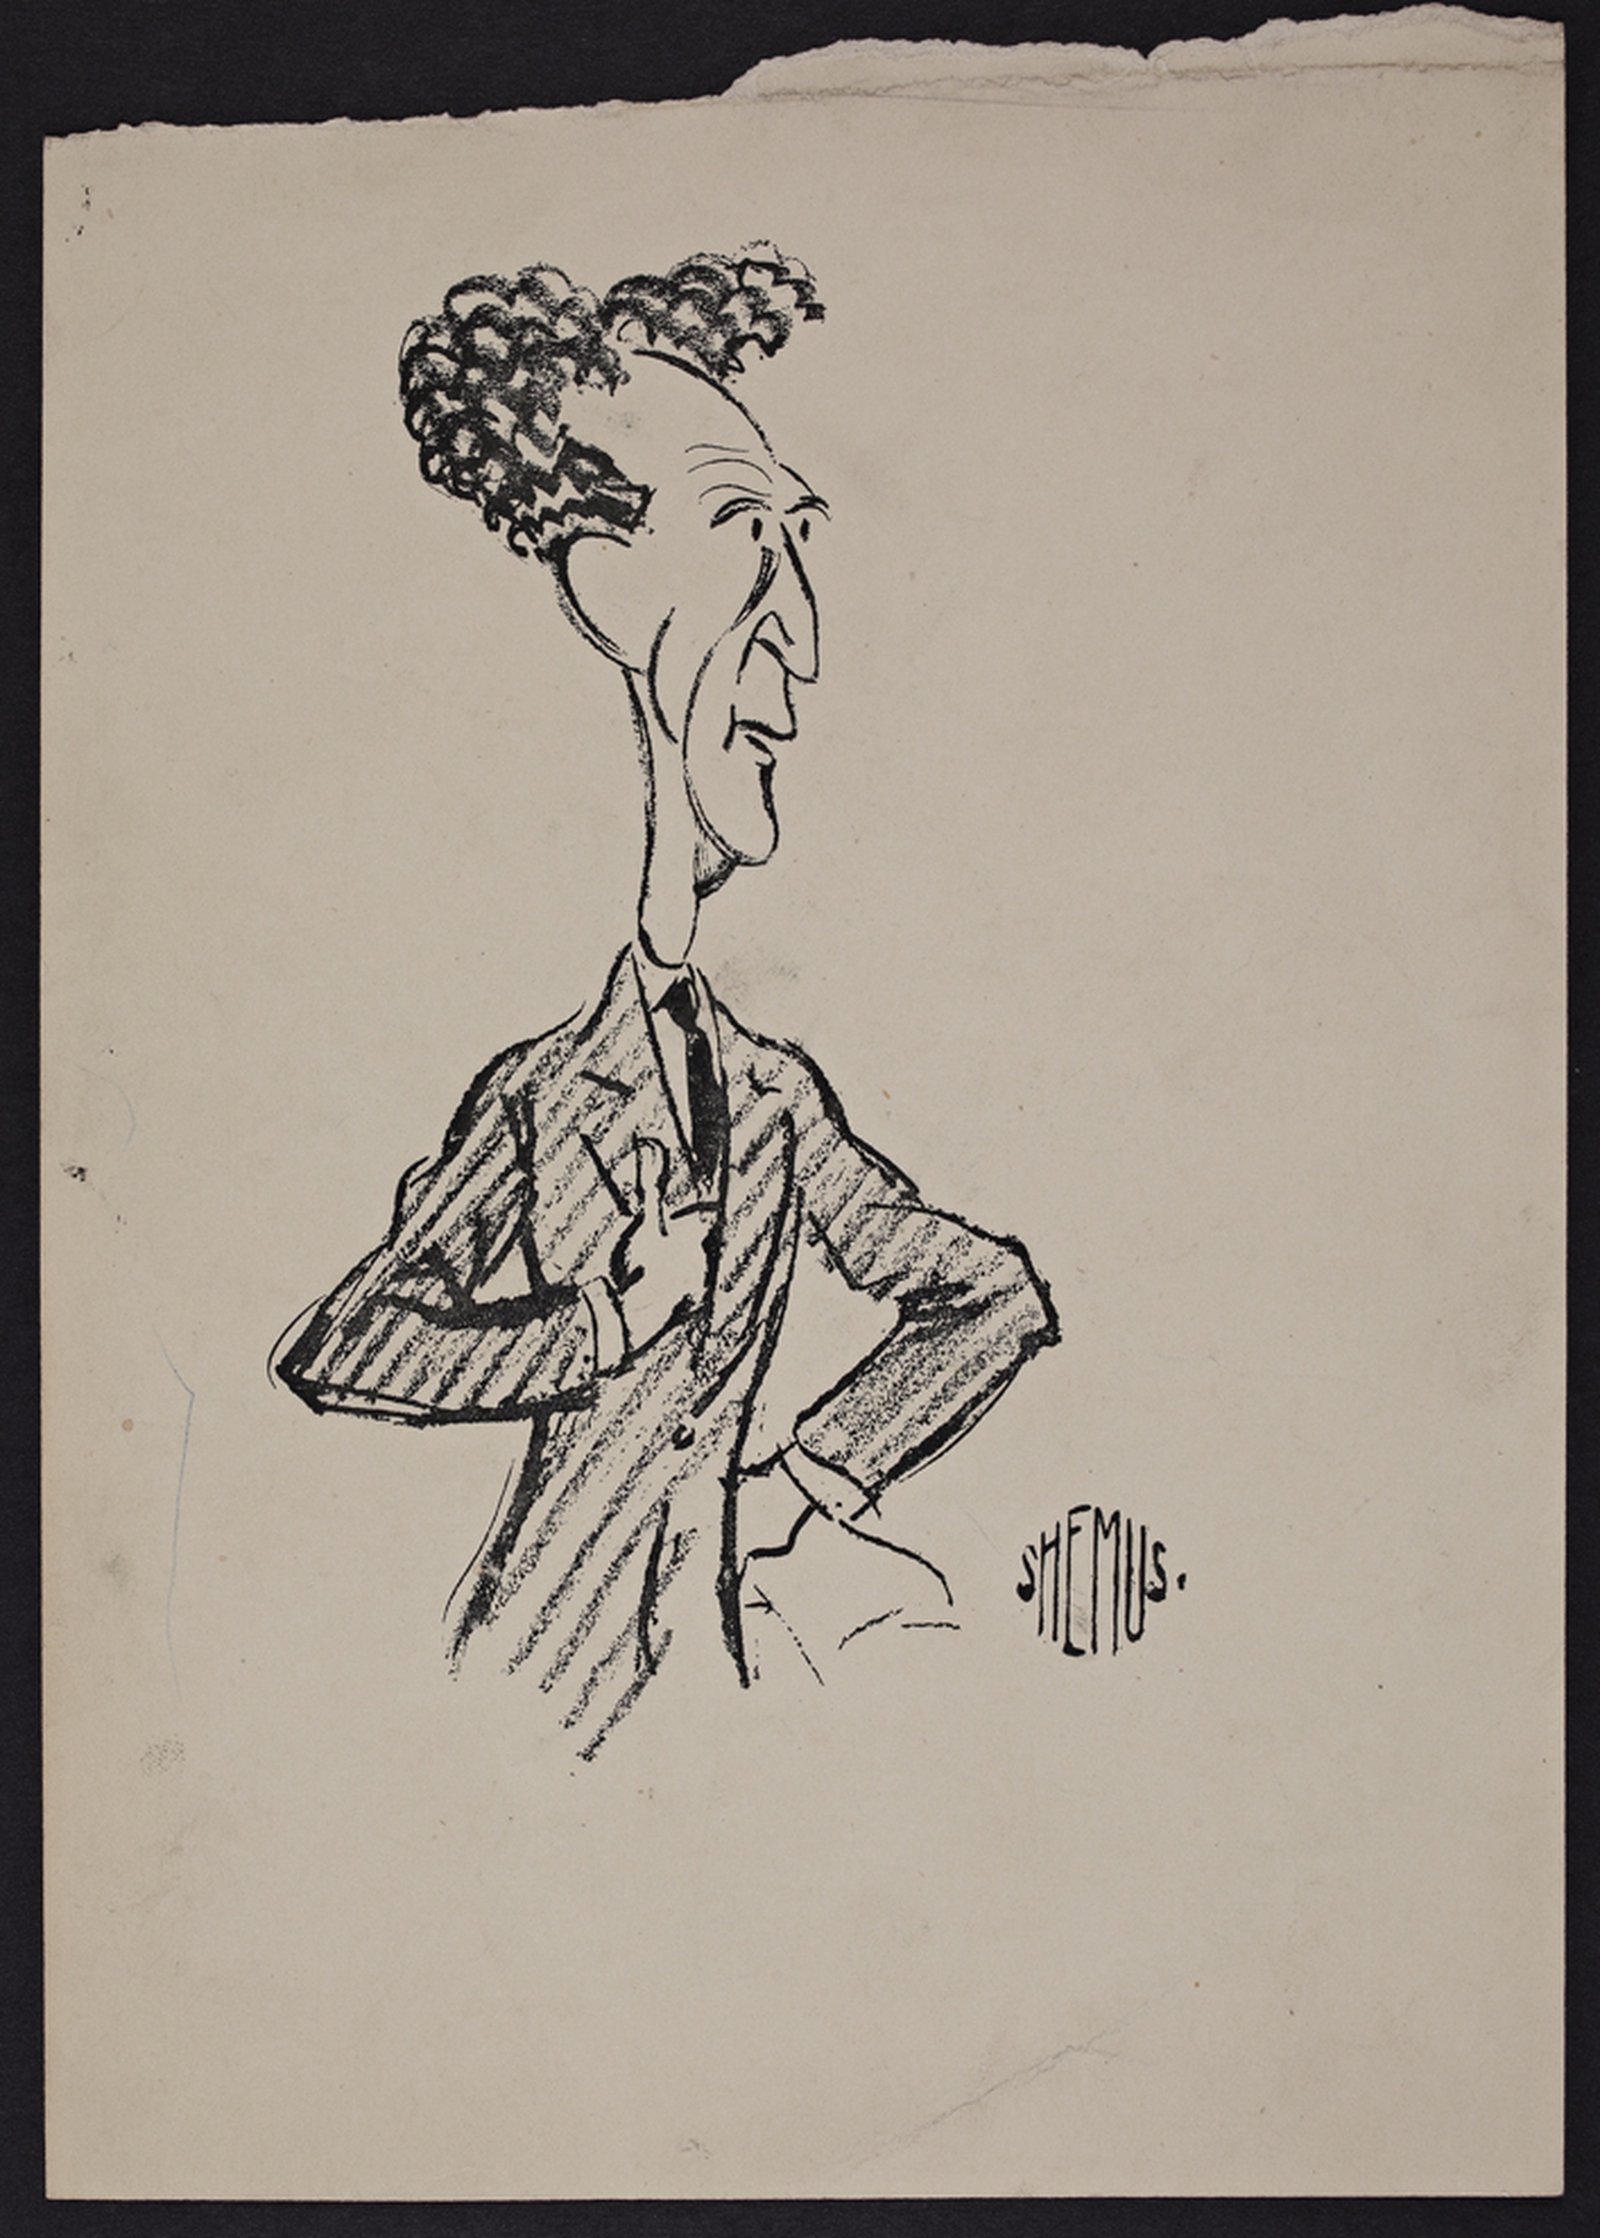 Image - Desmond Fitzgerald cartoon by Ernest Forbes  Image courtesy of the National Library of Ireland